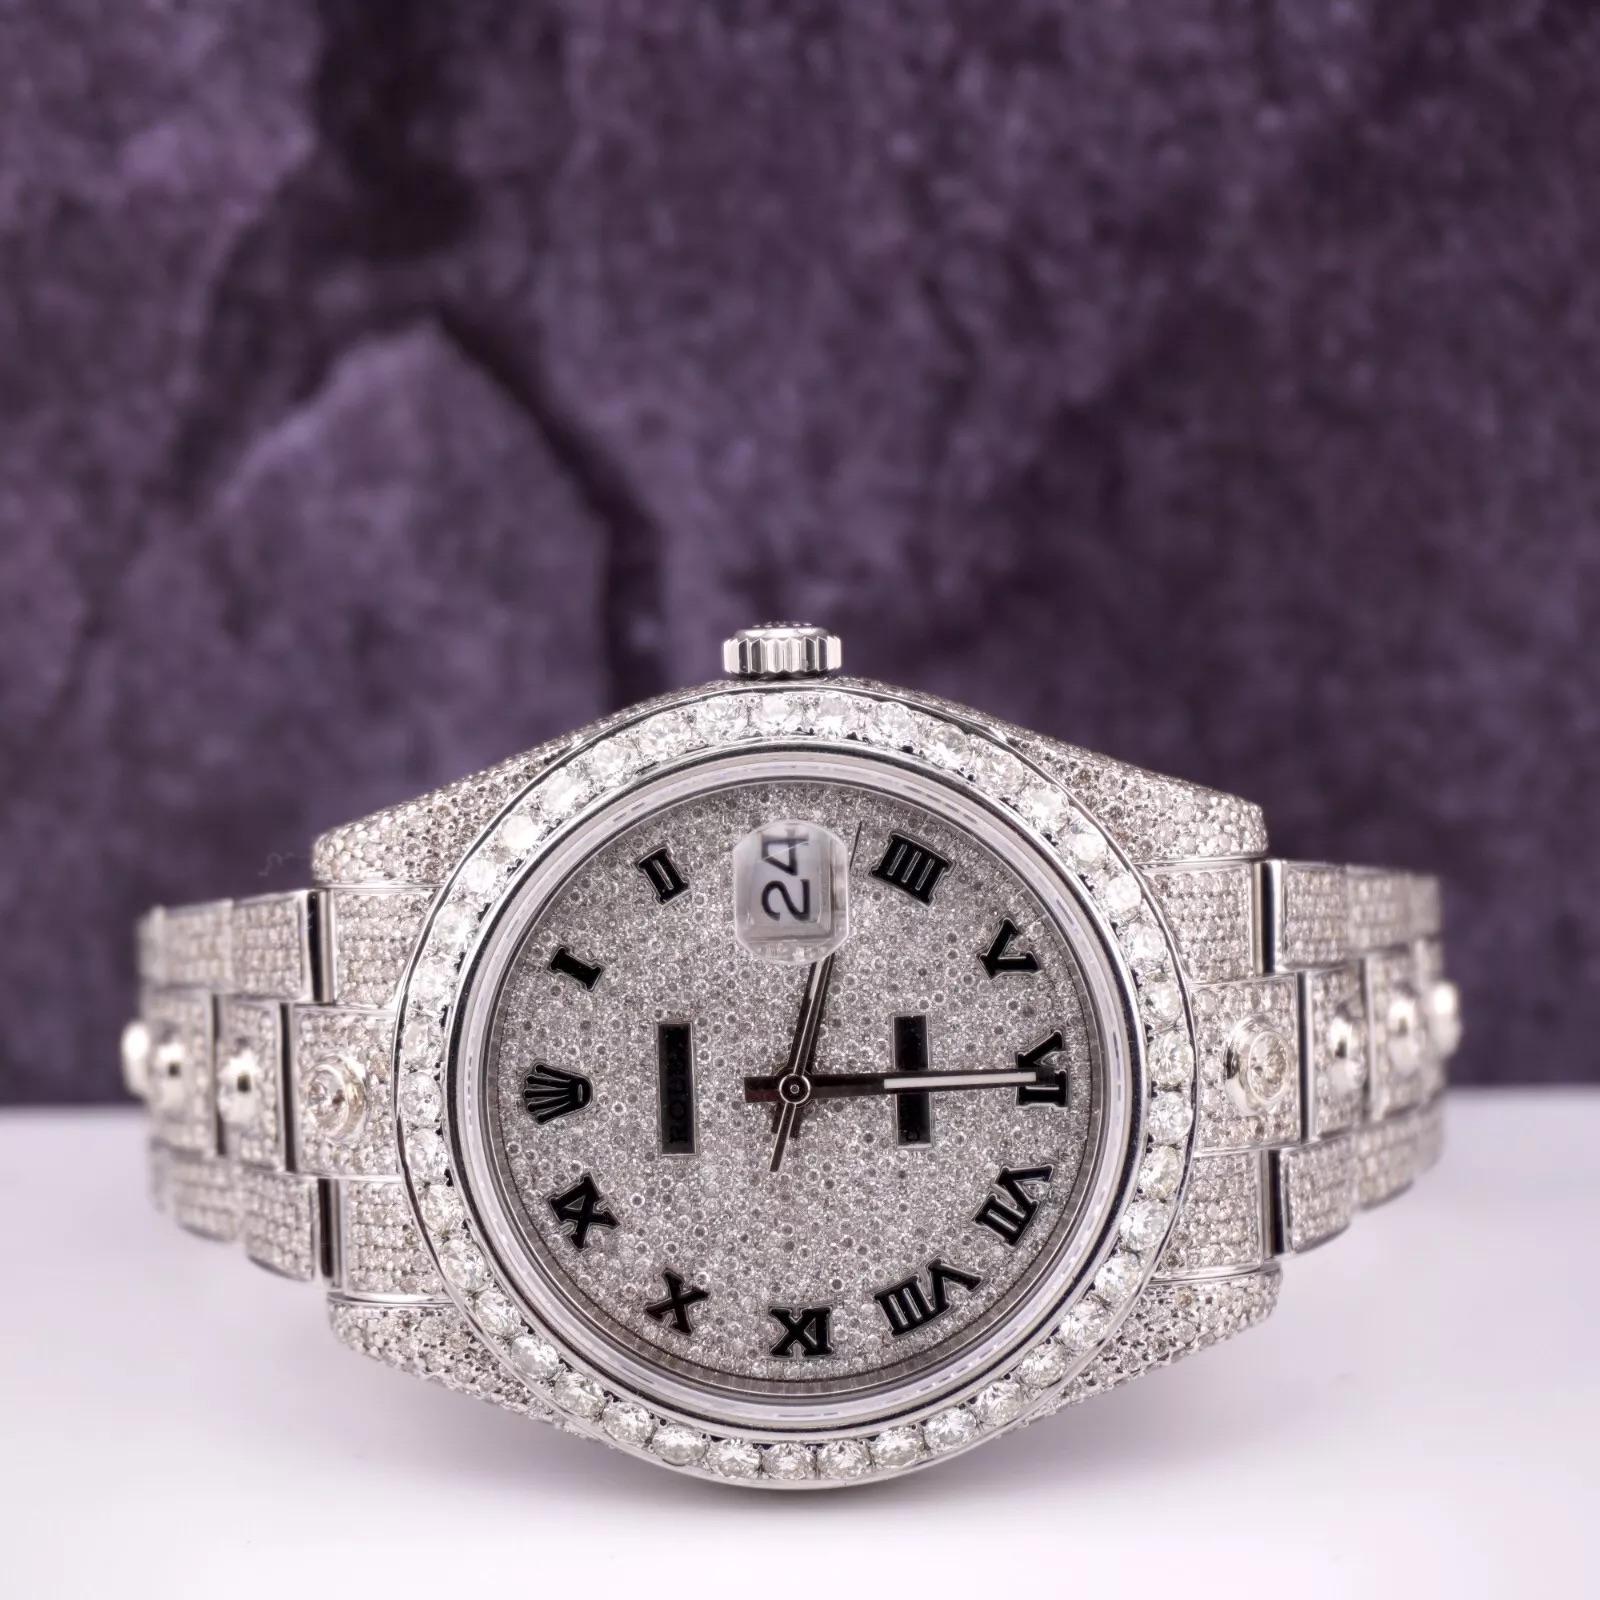 Rolex Datejust 41mm Watch customized with 18.00 carats of Genuine Diamonds! The entire watch is Genuine only the custom Diamond Bezel and Dial have been added. The entire bezel, dial, case and band have been beautifully handset in white 